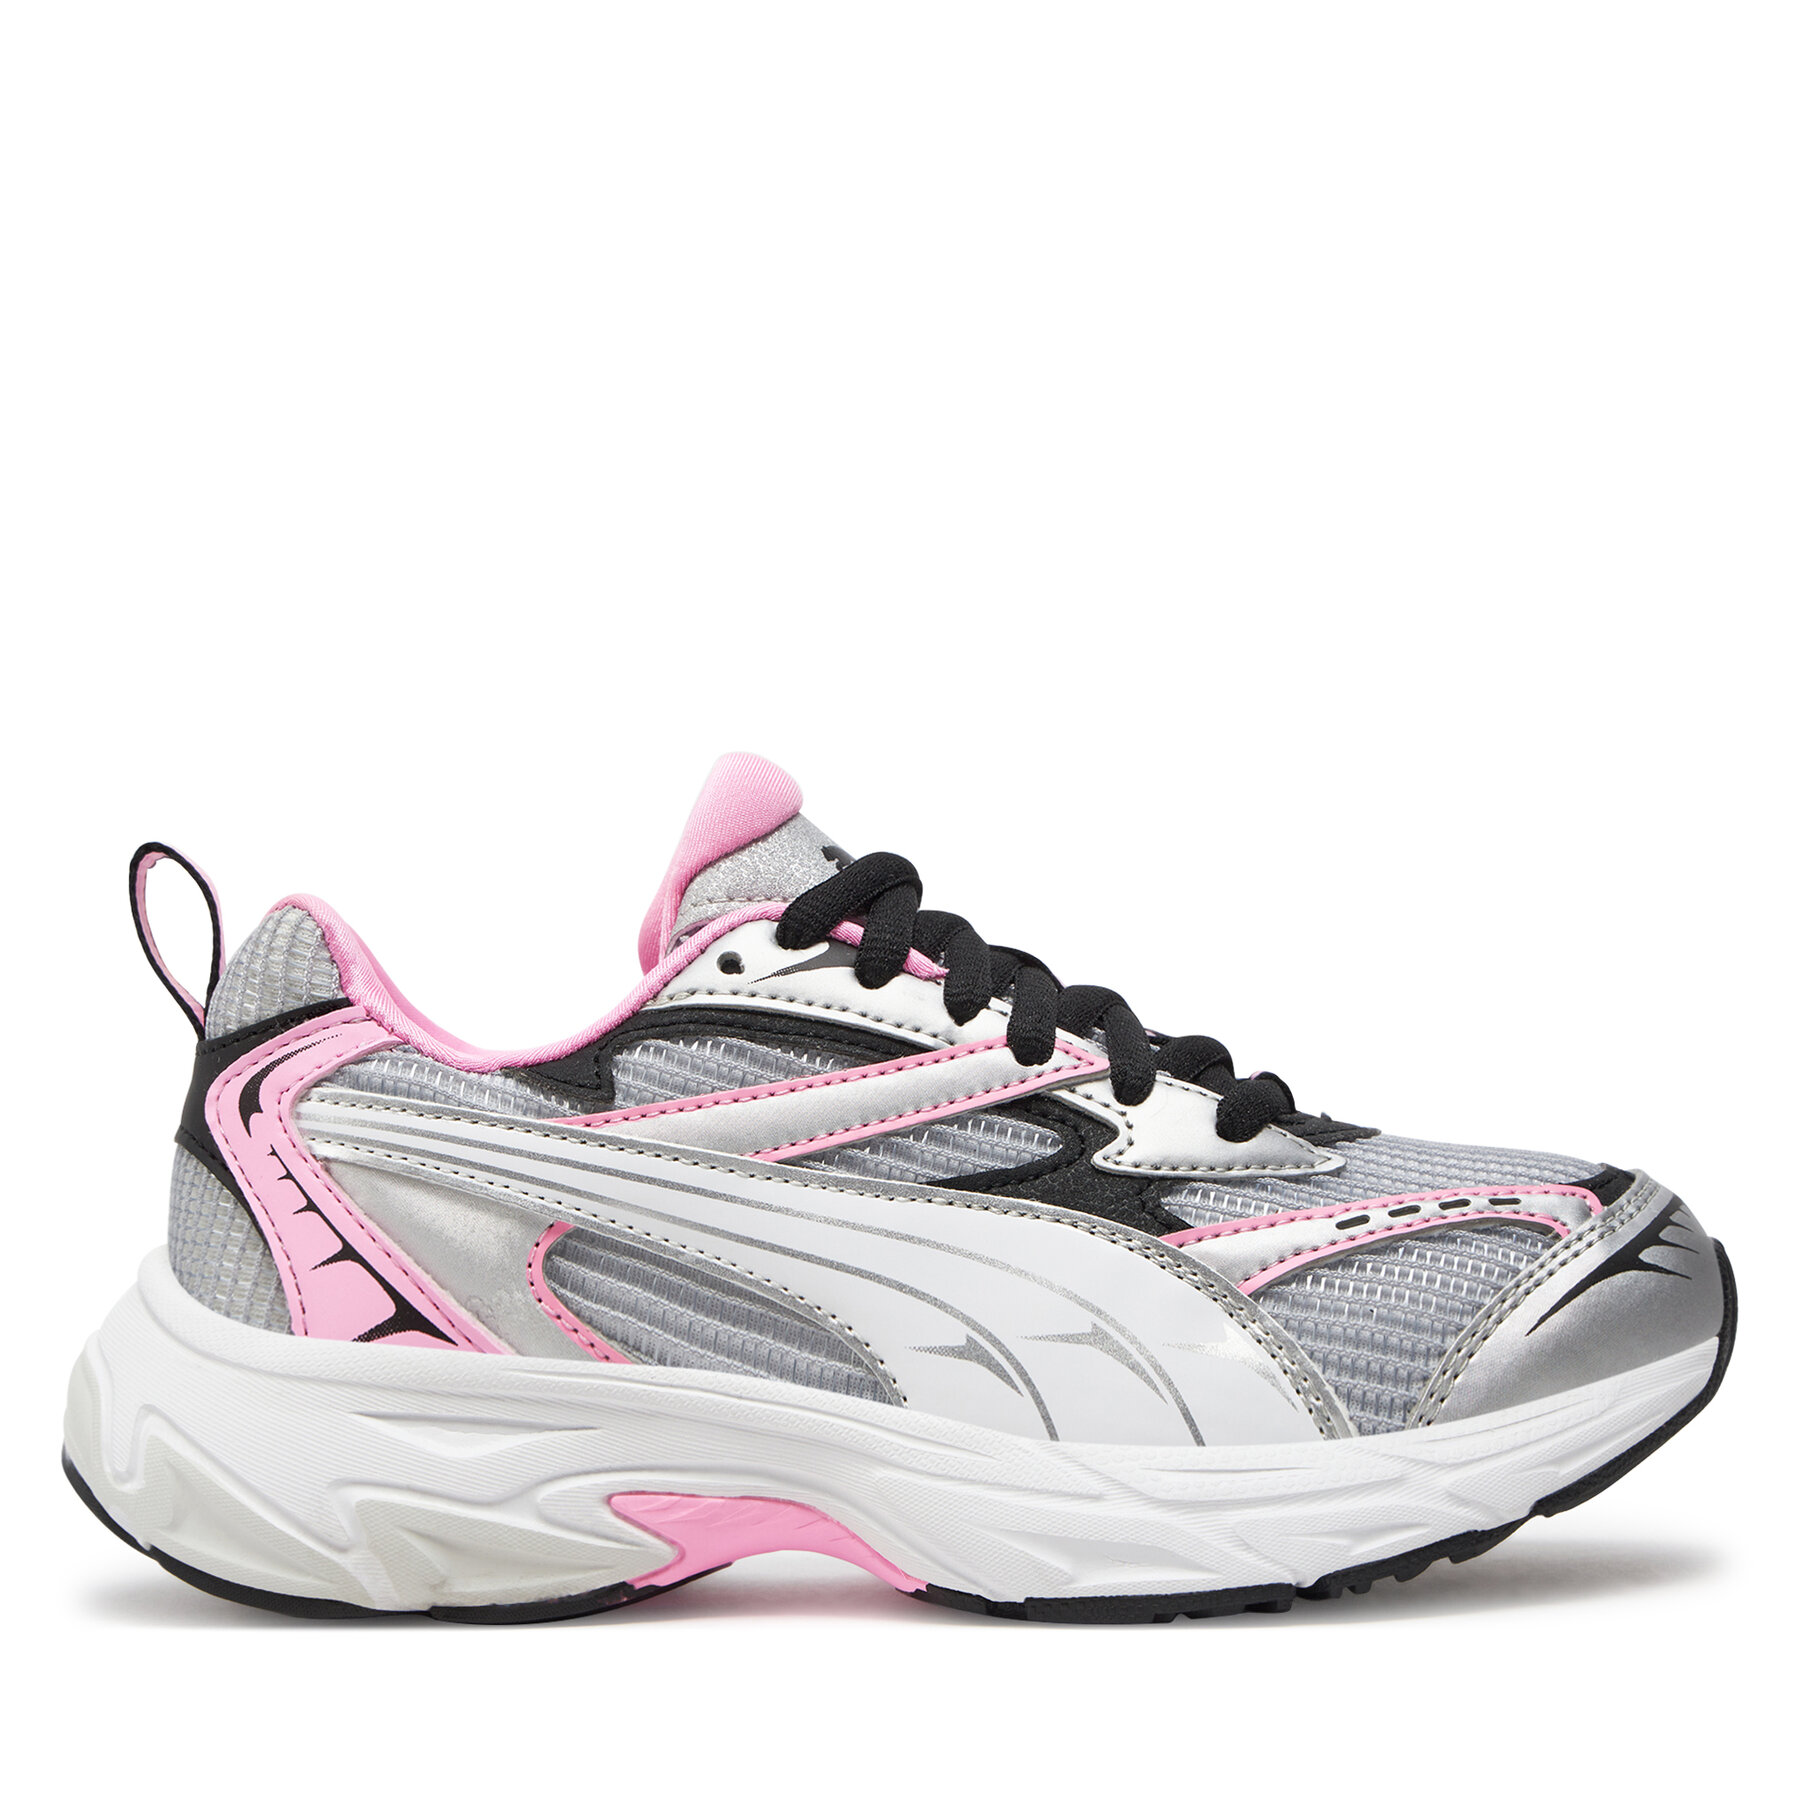 Sneakers Puma Morphic Athletic Feather 395919-03 Feather Gray/Pink Delight/Puma White von Puma